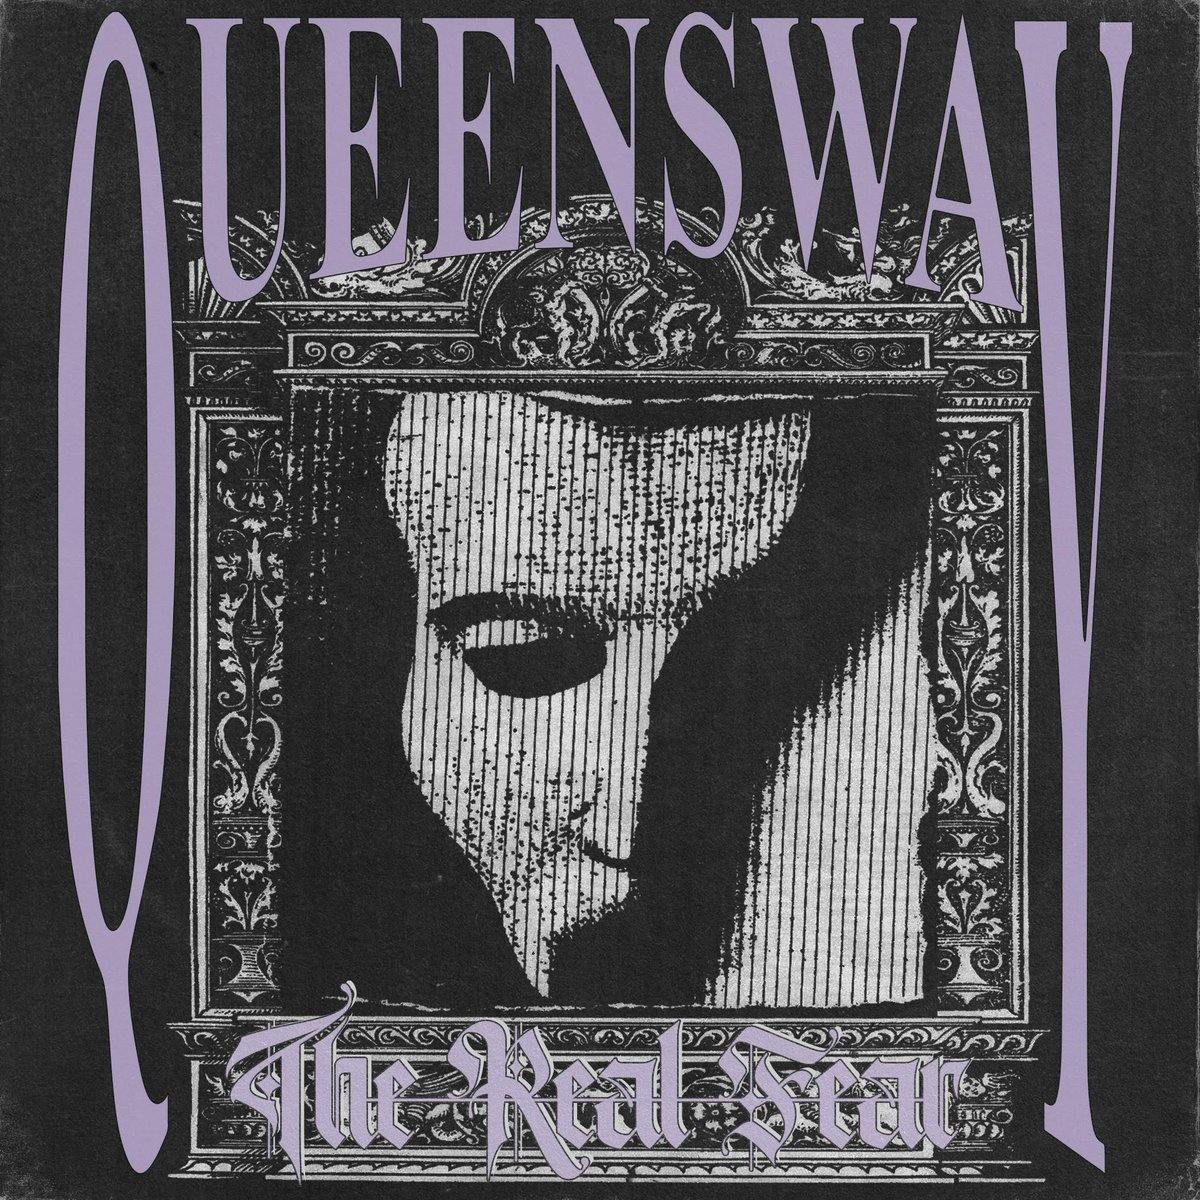 Buy – Queensway "The Real Fear" 12" – Band & Music Merch – Cold Cuts Merch